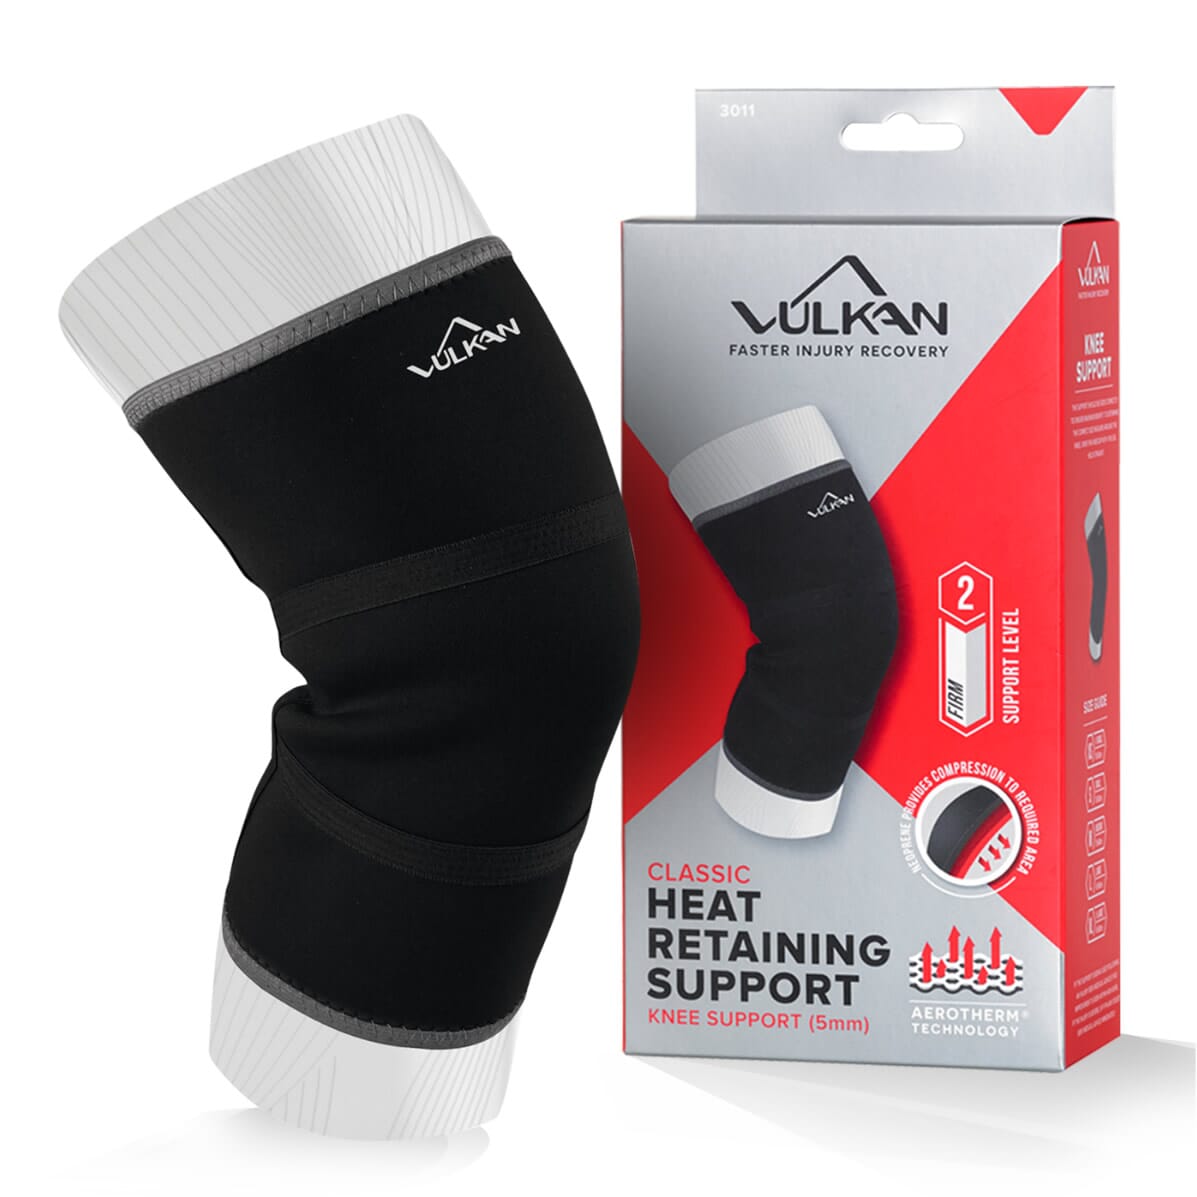 View Knee Support Vulkan XSmall 5mm thick information